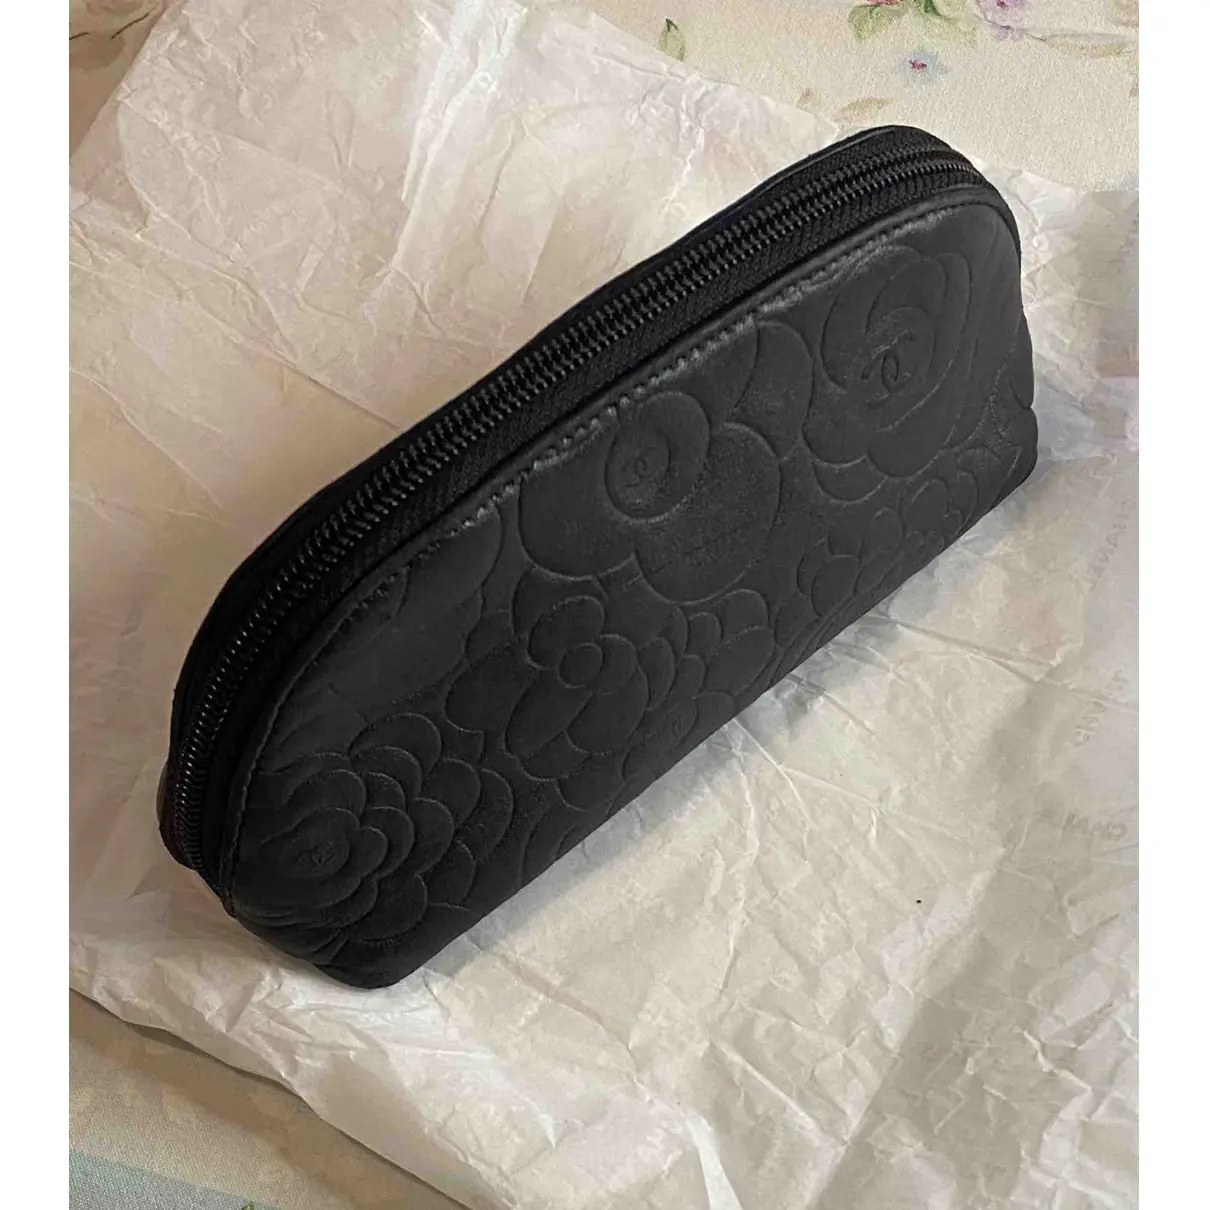 Buy Chanel Leather clutch bag online